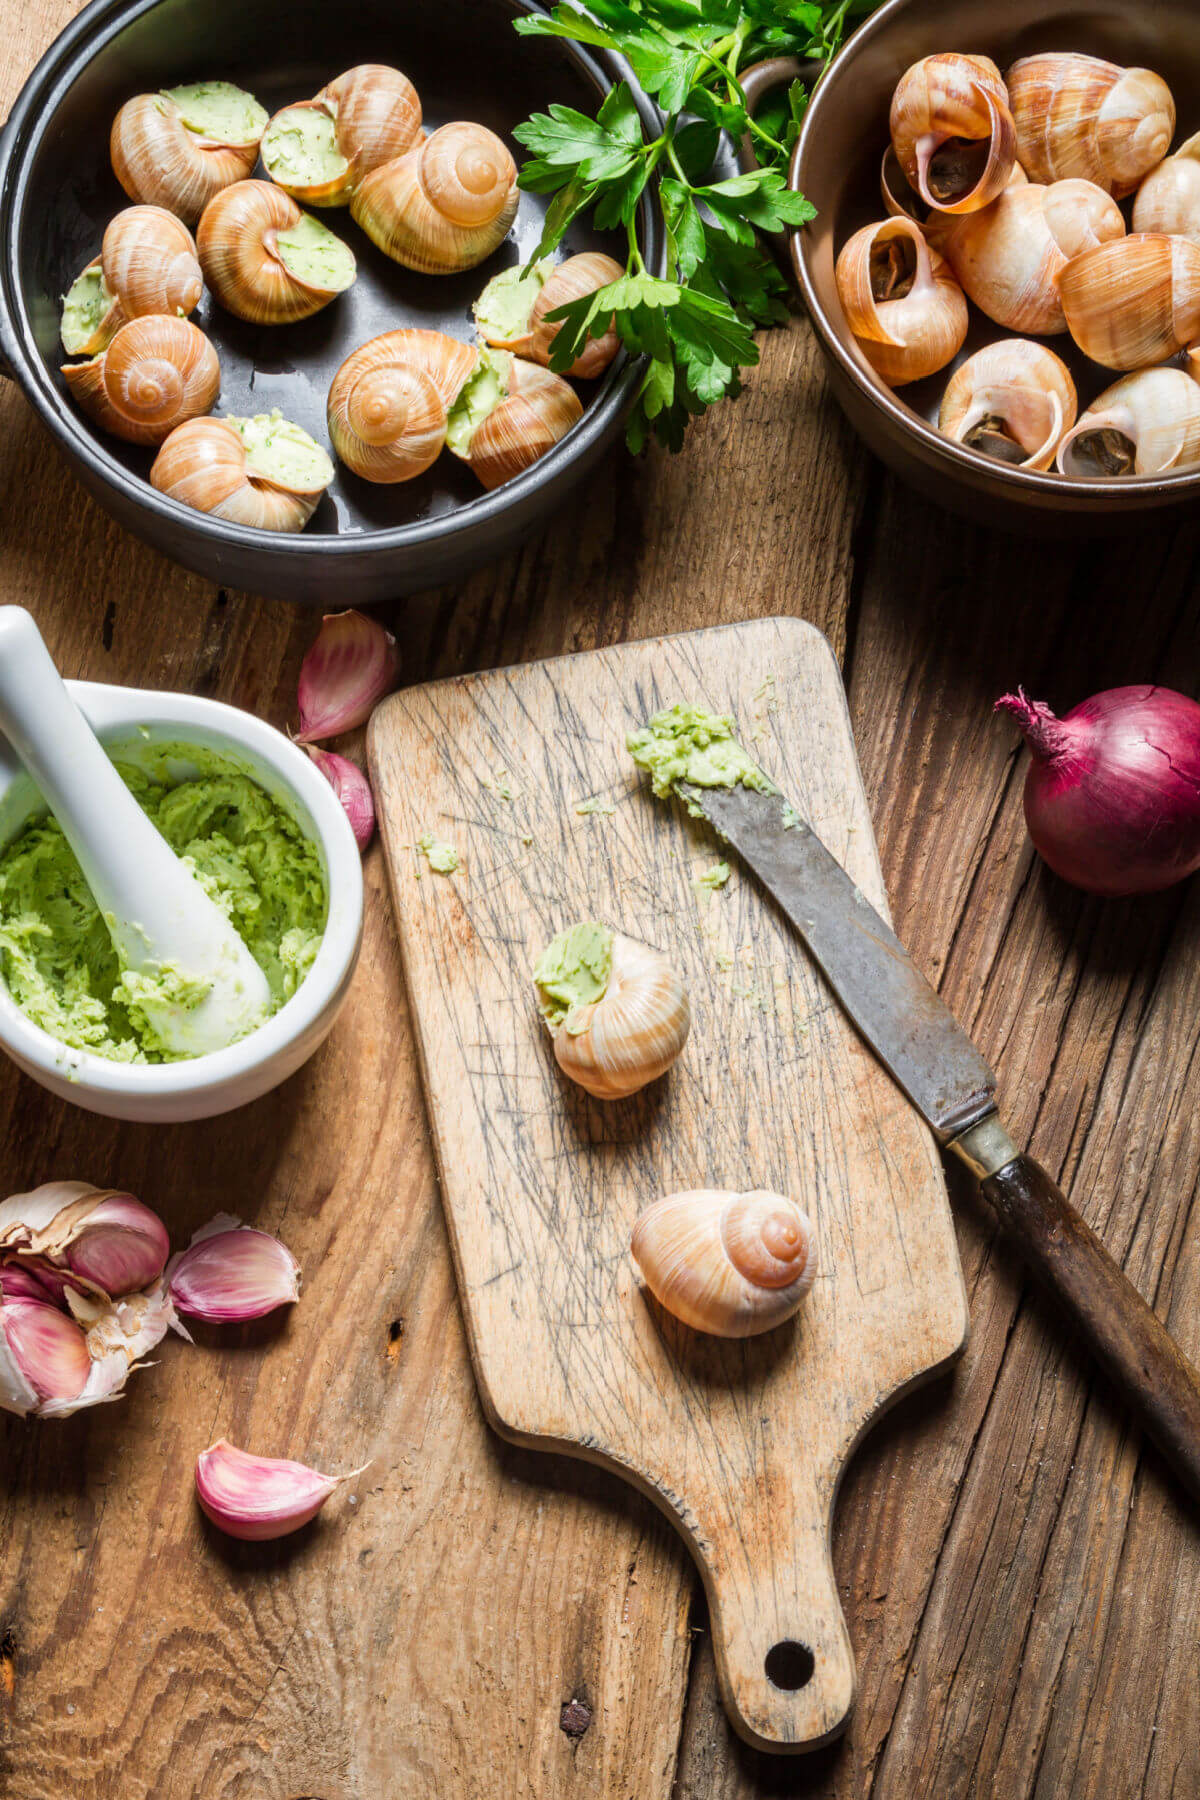 This photo shows how to make escargots de Bourgogne. There are bowls of snail shells, homemade parsley butter, and prepared escargots de Bourgogn on a wooden table. 